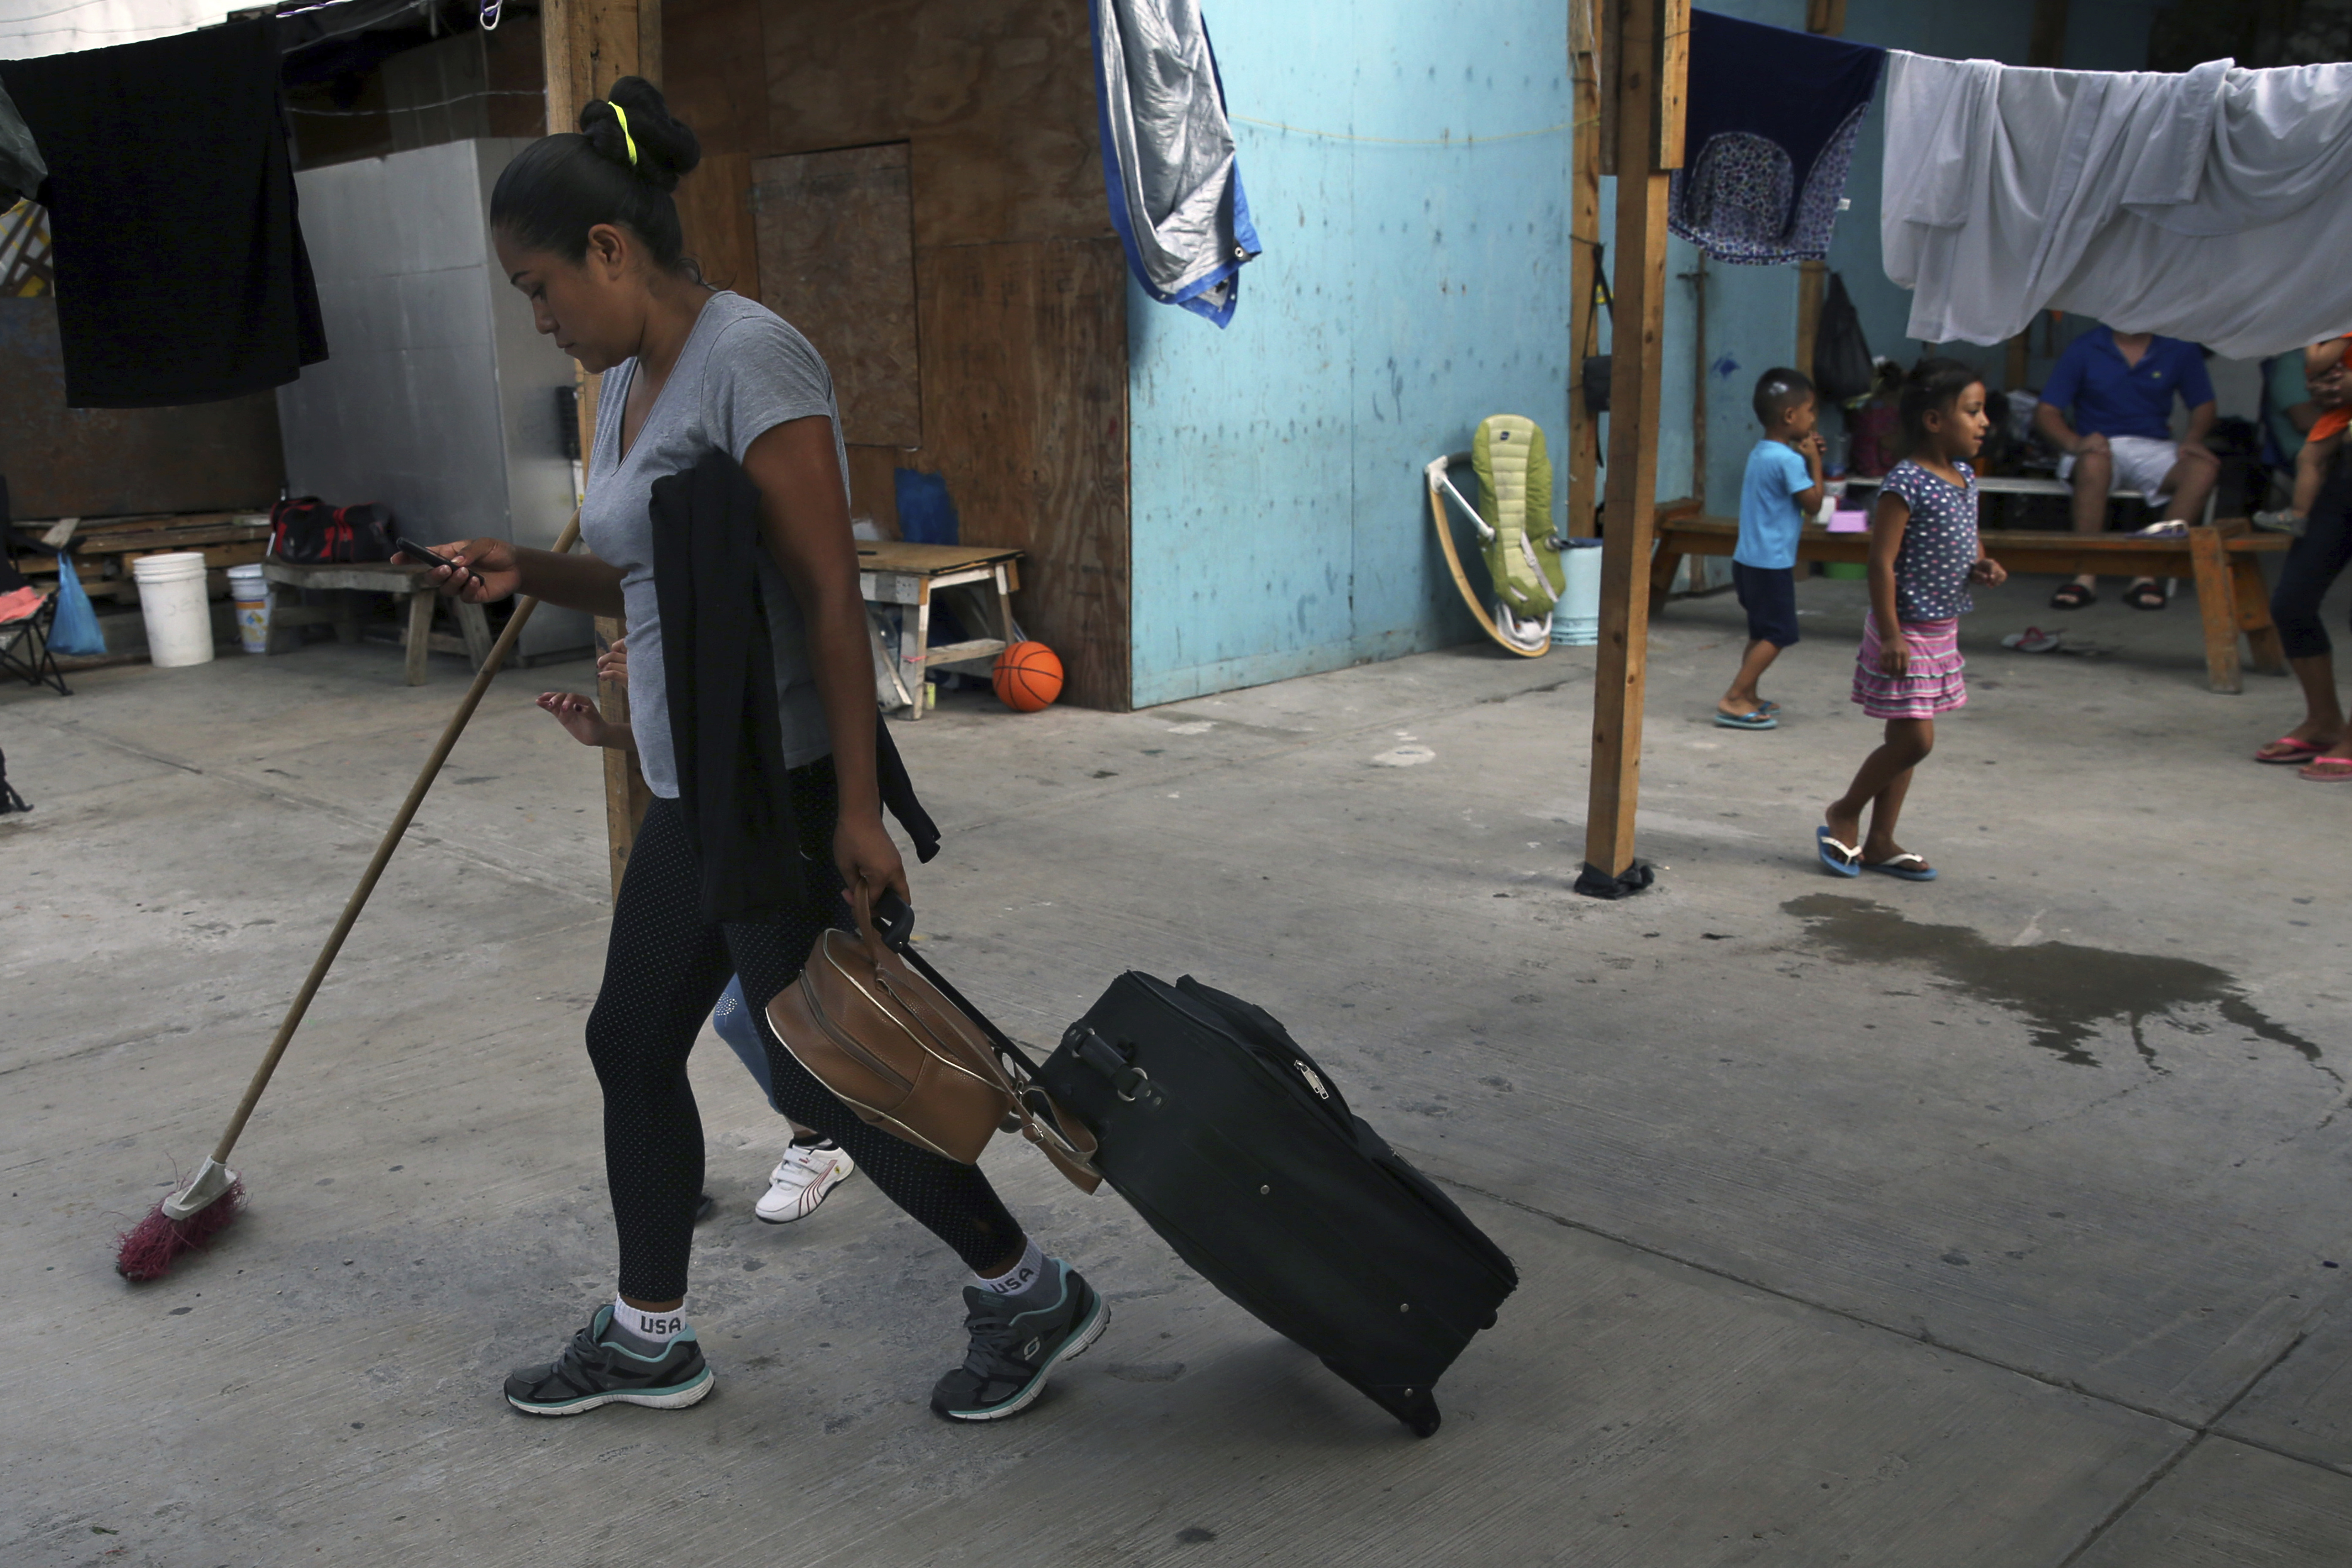 A migrant woman who was lodging at the AMAR migrant shelter get ready for a trip to the border to apply for asylum in the United States side, from Nuevo Laredo, Mexico, Wednesday, July 17, 2019. Asylum-seekers grappled to understand what a new U.S. policy that all but eliminates refugee claims by Central Americans and many others meant for their bids to find a better life in America amid a chaos of rumors, confusion and fear. (AP Photo/Marco Ugarte)